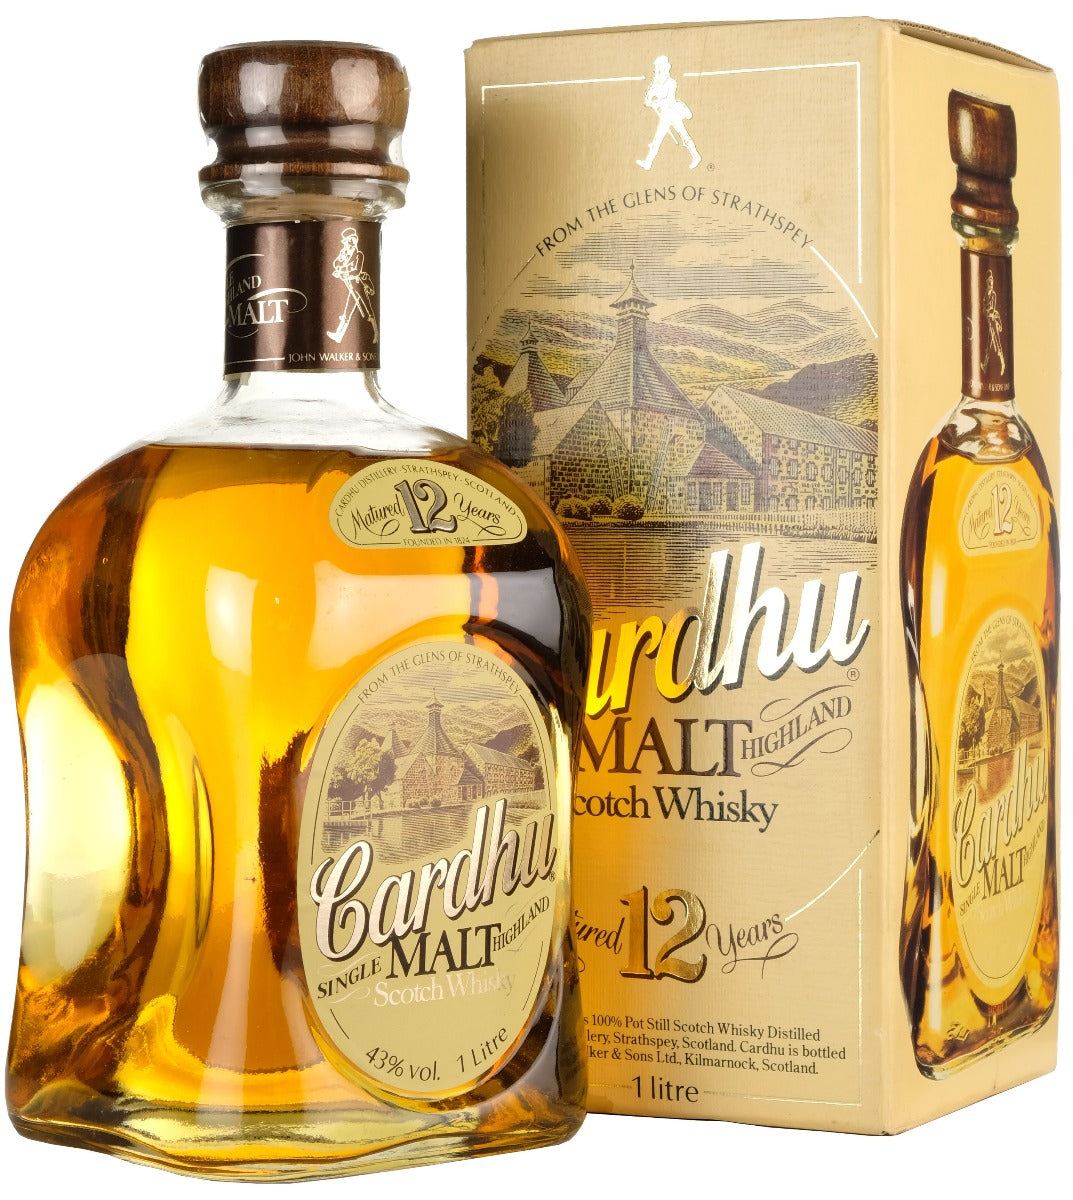 Cardhu 12 Year Old 1 Litre